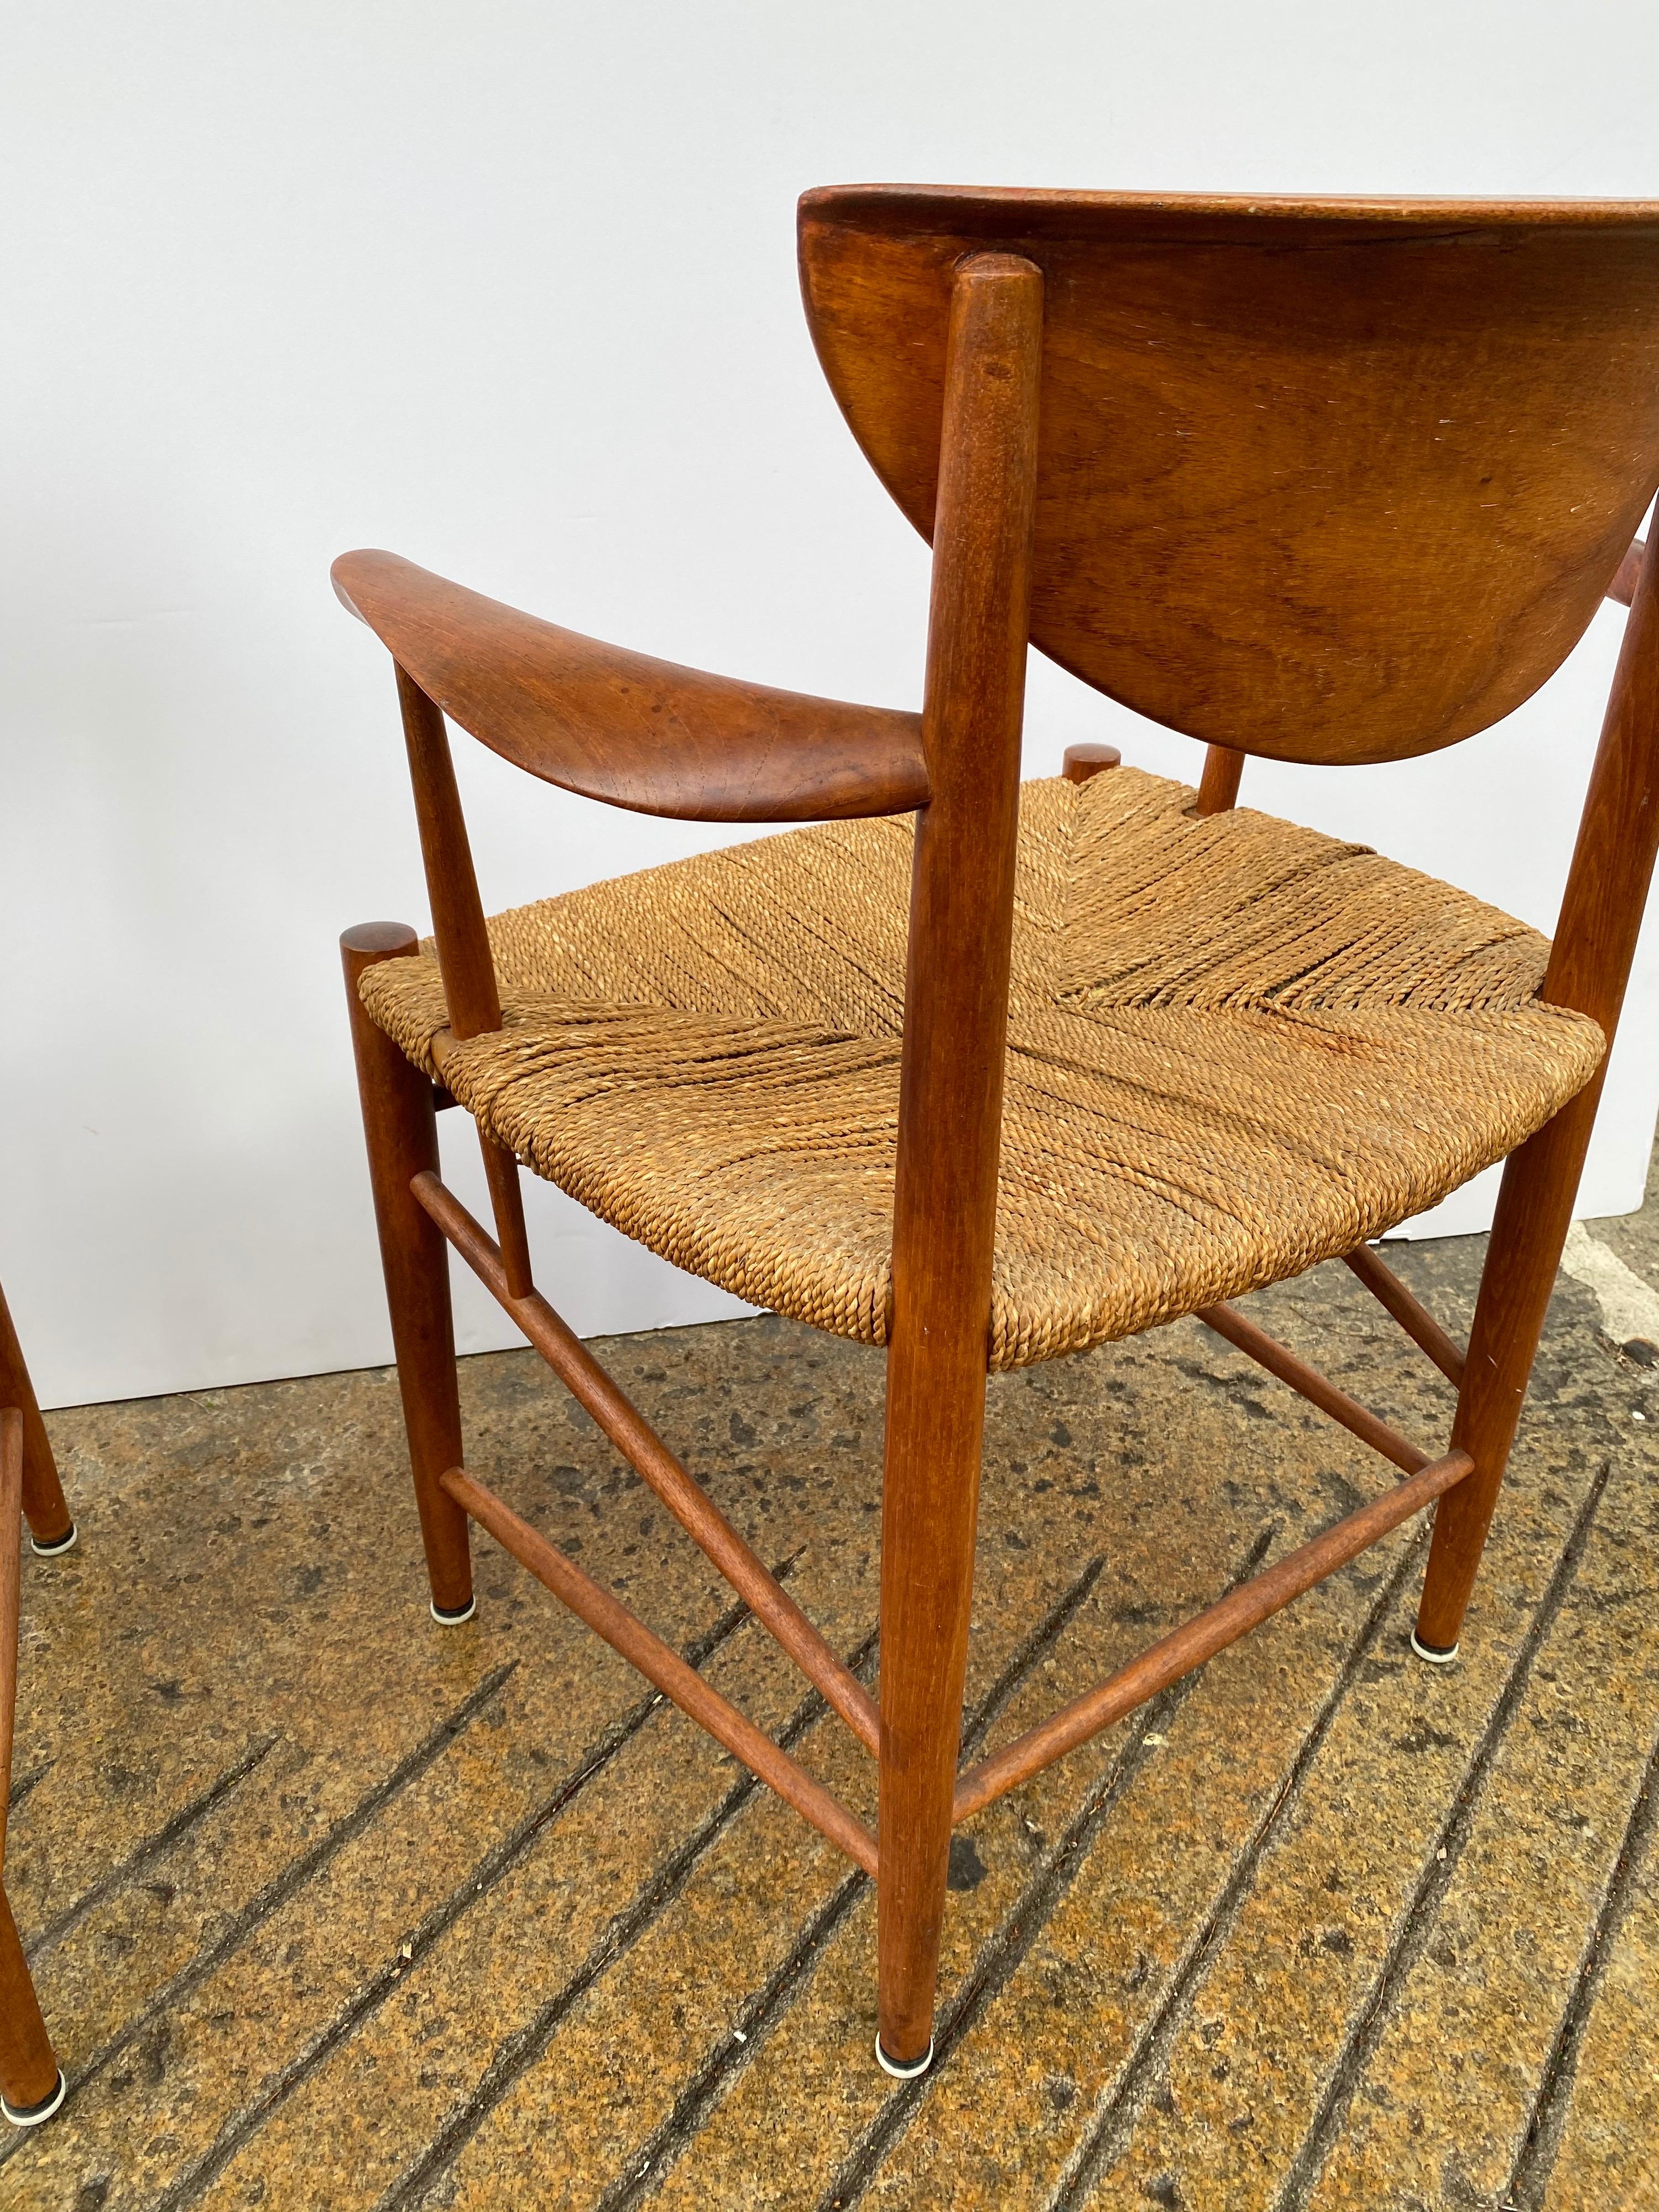 Cane Peter Hvidt and Orla Molgaard-Nielsen Arm Chairs